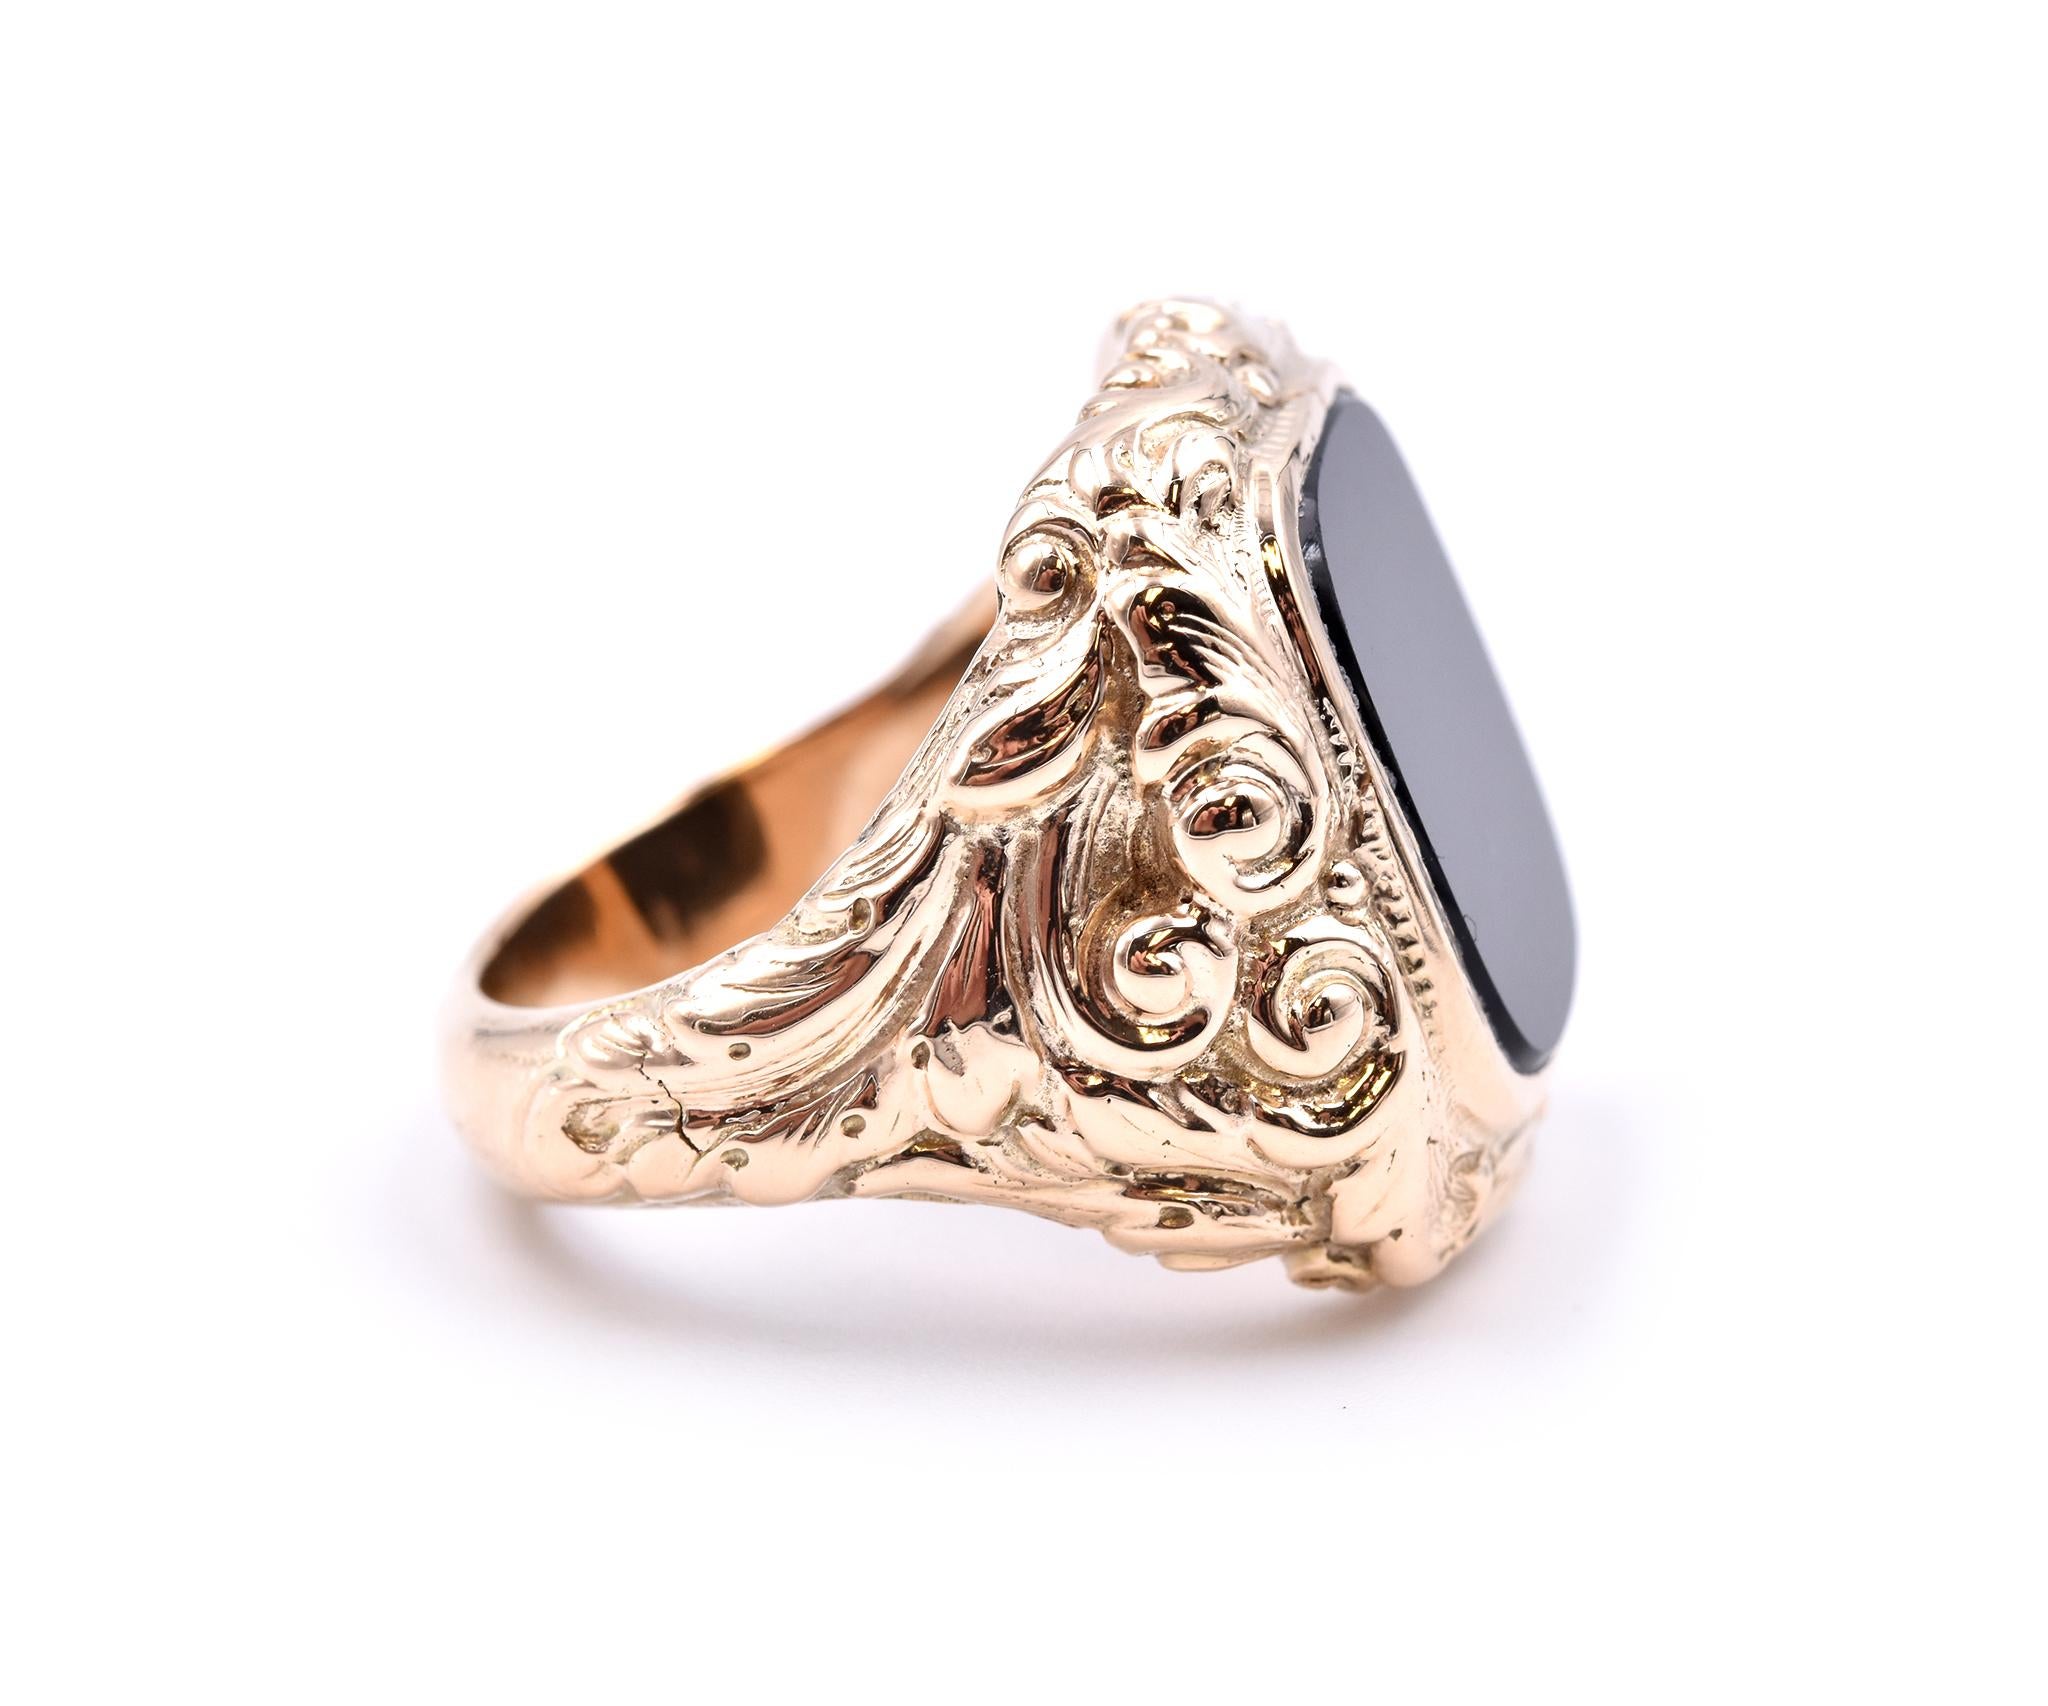 Designer: custom design
Material: 14k yellow gold 
Ring Size: 8 (please allow two additional shipping days for sizing requests)
Dimensions: ring top measures 21 X 22mm
Weight: 19.30 grams
